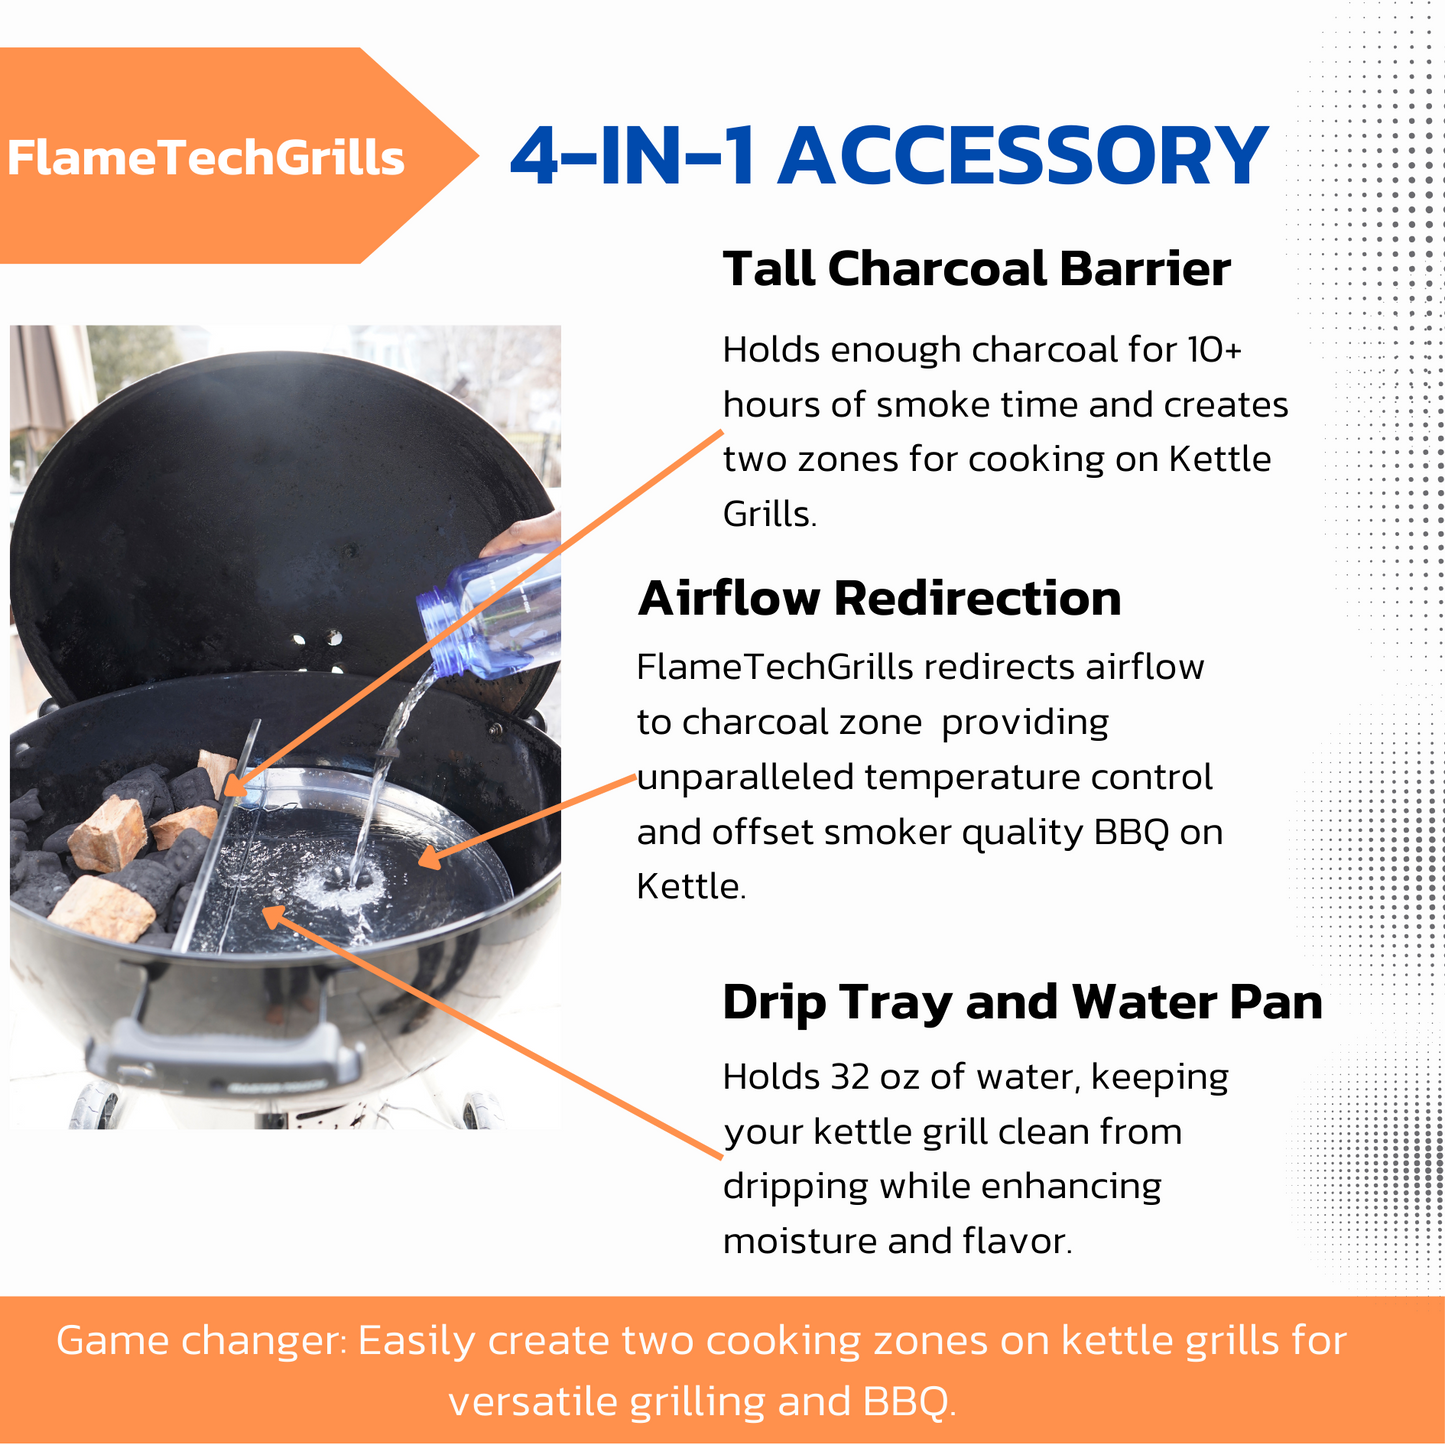 FlameTechGrills Charcoal Basket and Drip Tray - All in One